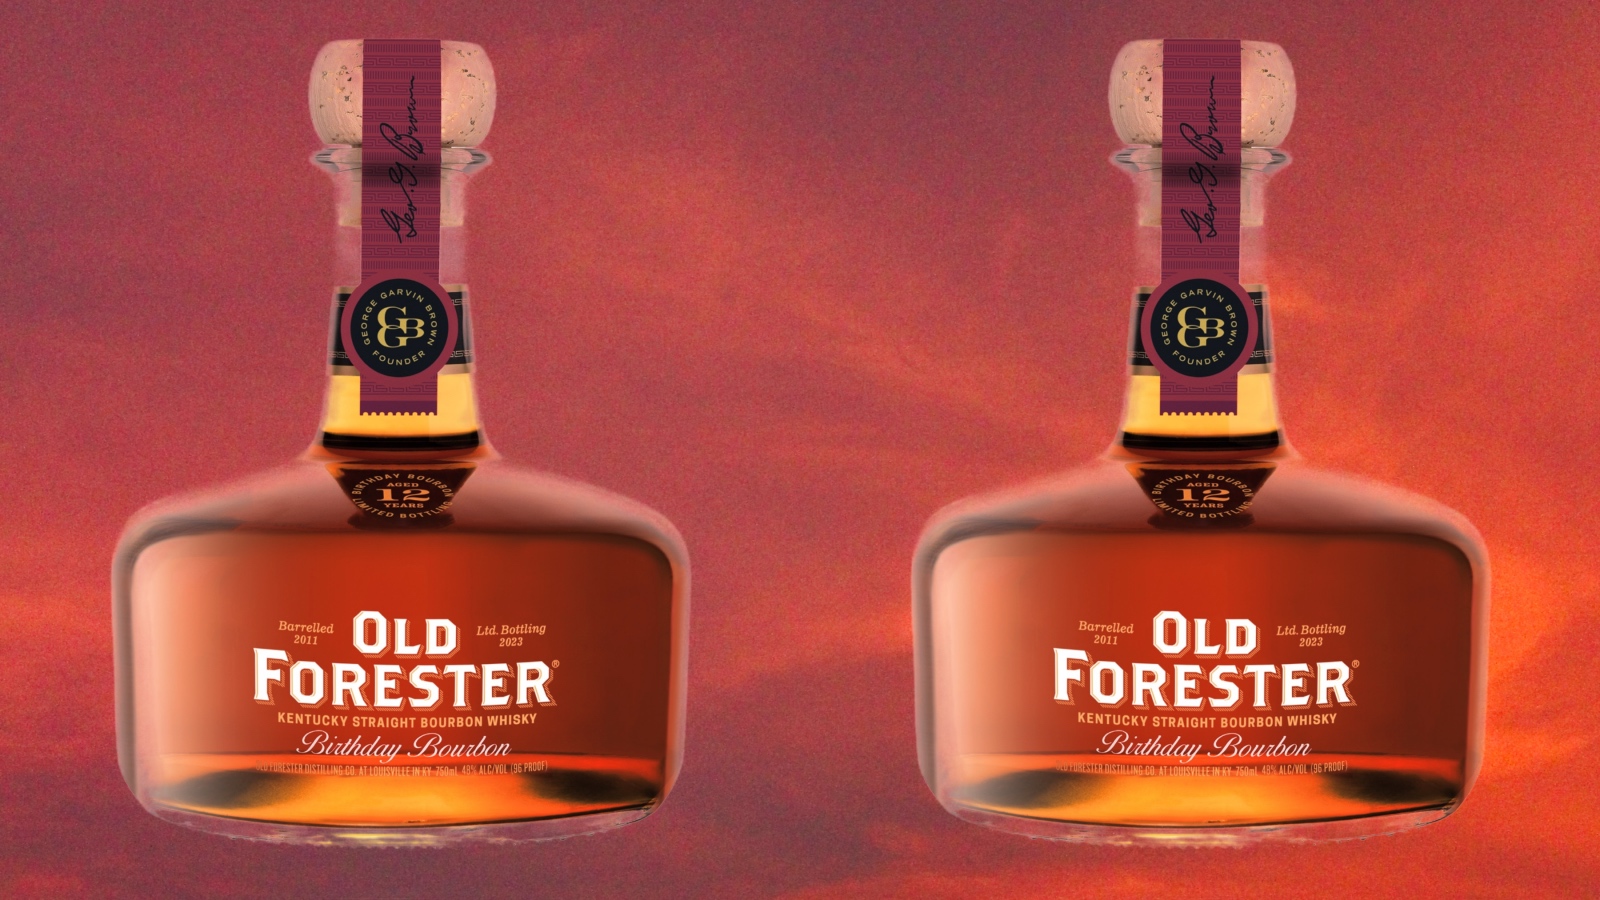 2023 Old Foresters Birthday Bourbon bottles in front of skyb ackground